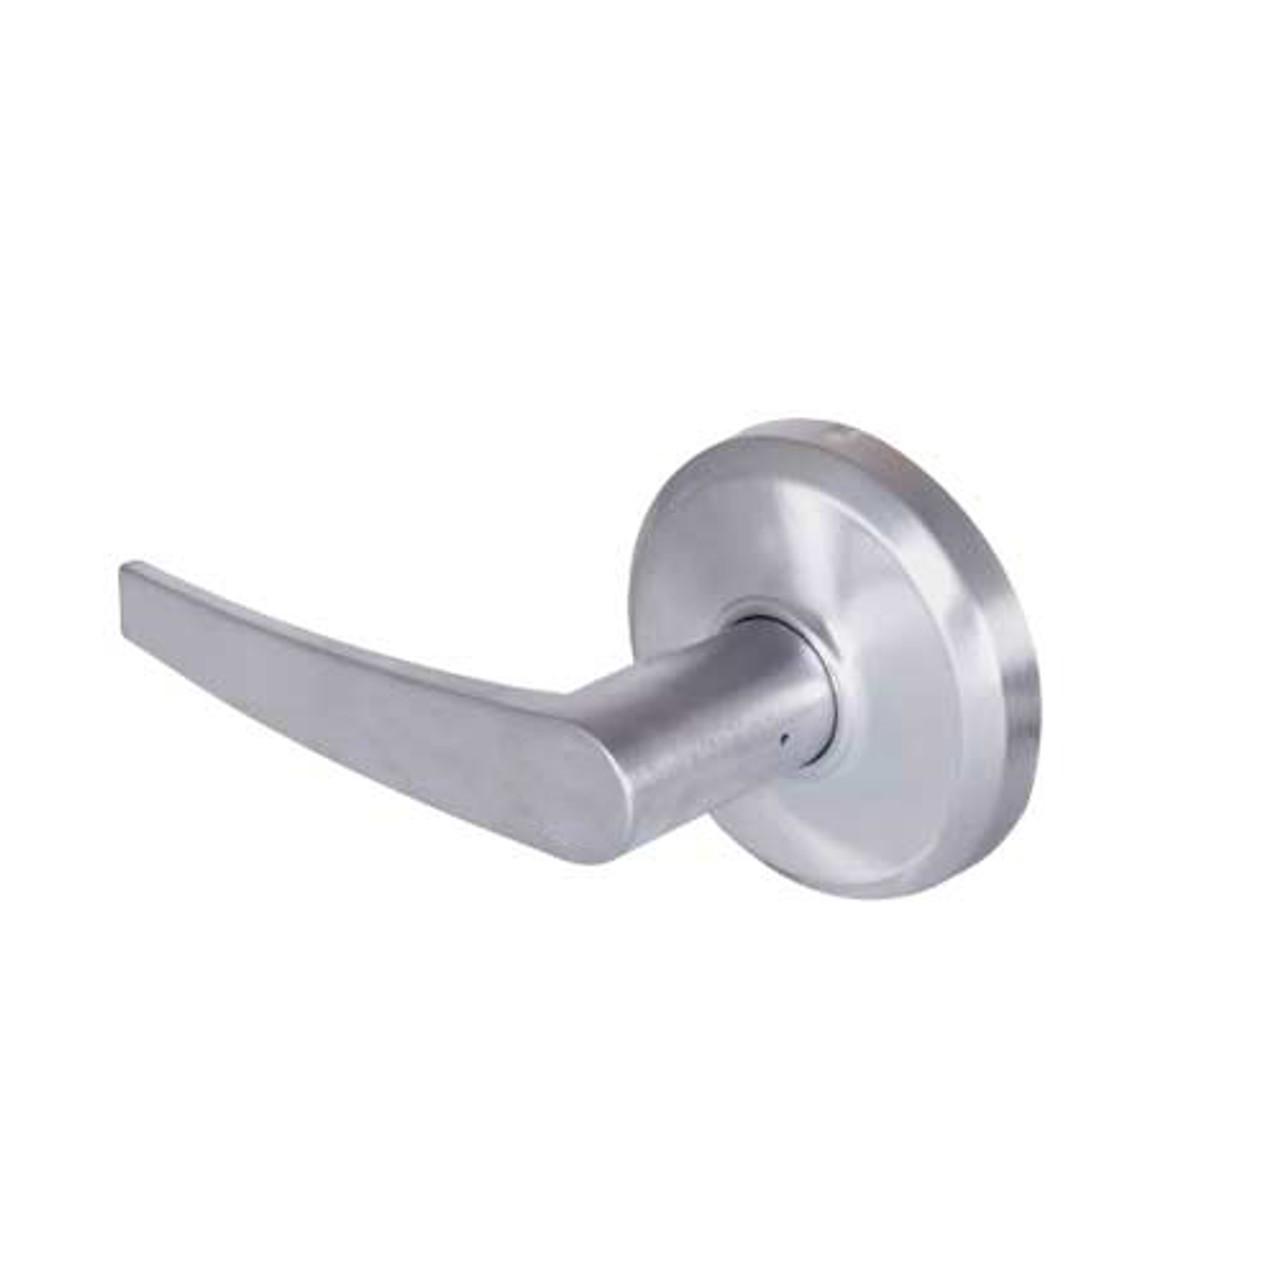 QCL235A626S5478S Stanley QCL200 Series Cylindrical Communicating Lock with Slate Lever in Satin Chrome Finish